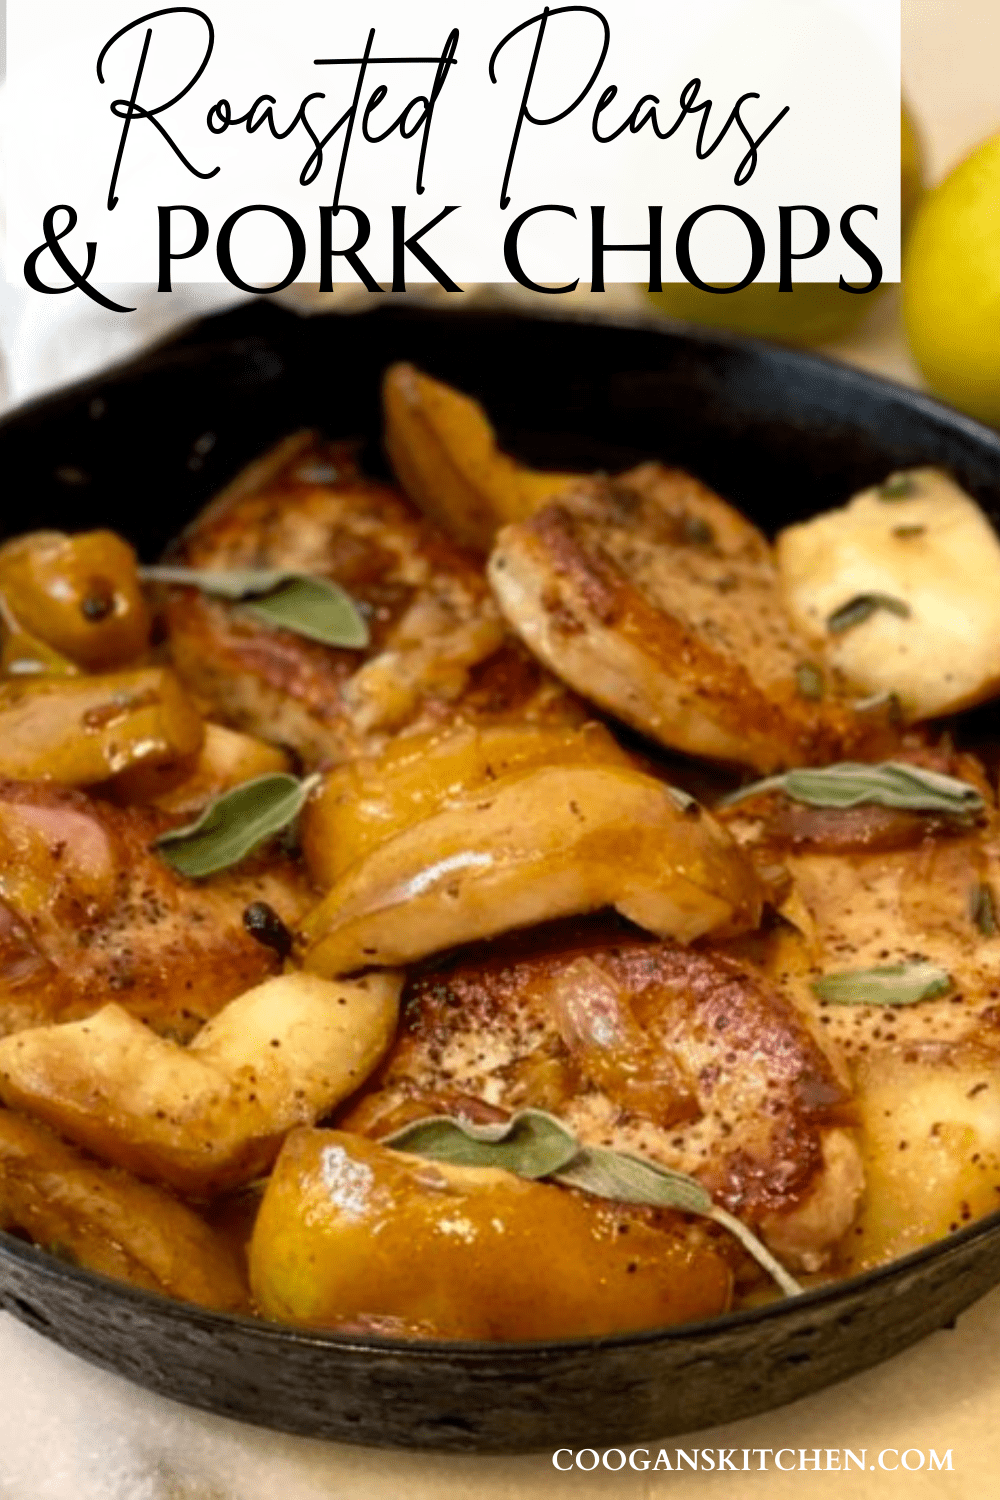 Roasted Pears and Pork Chops - Coogan's Kitchen